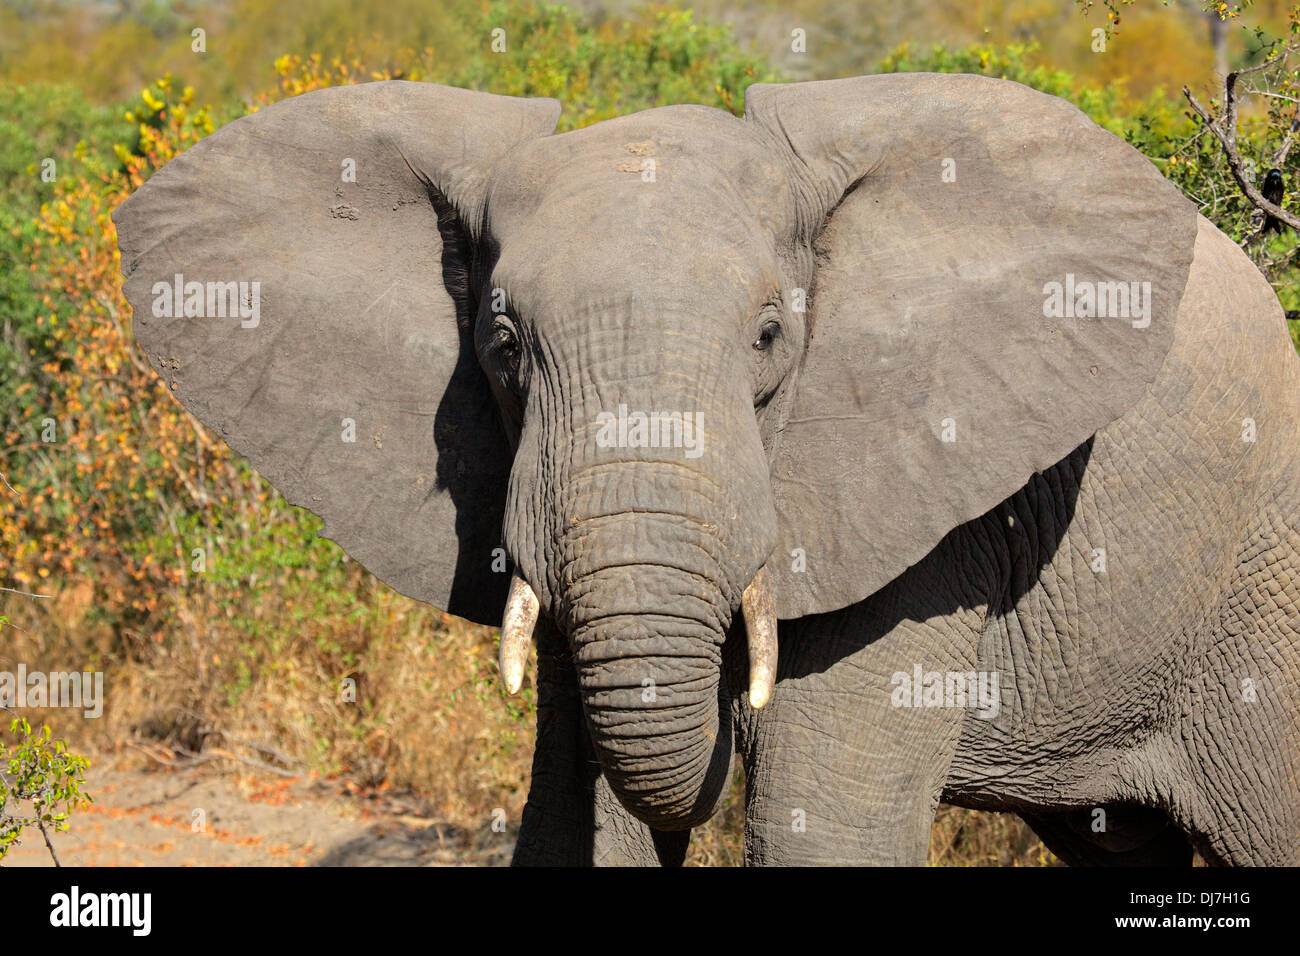 African elephant (Loxodonta africana) with large flapping ears, South Africa Stock Photo